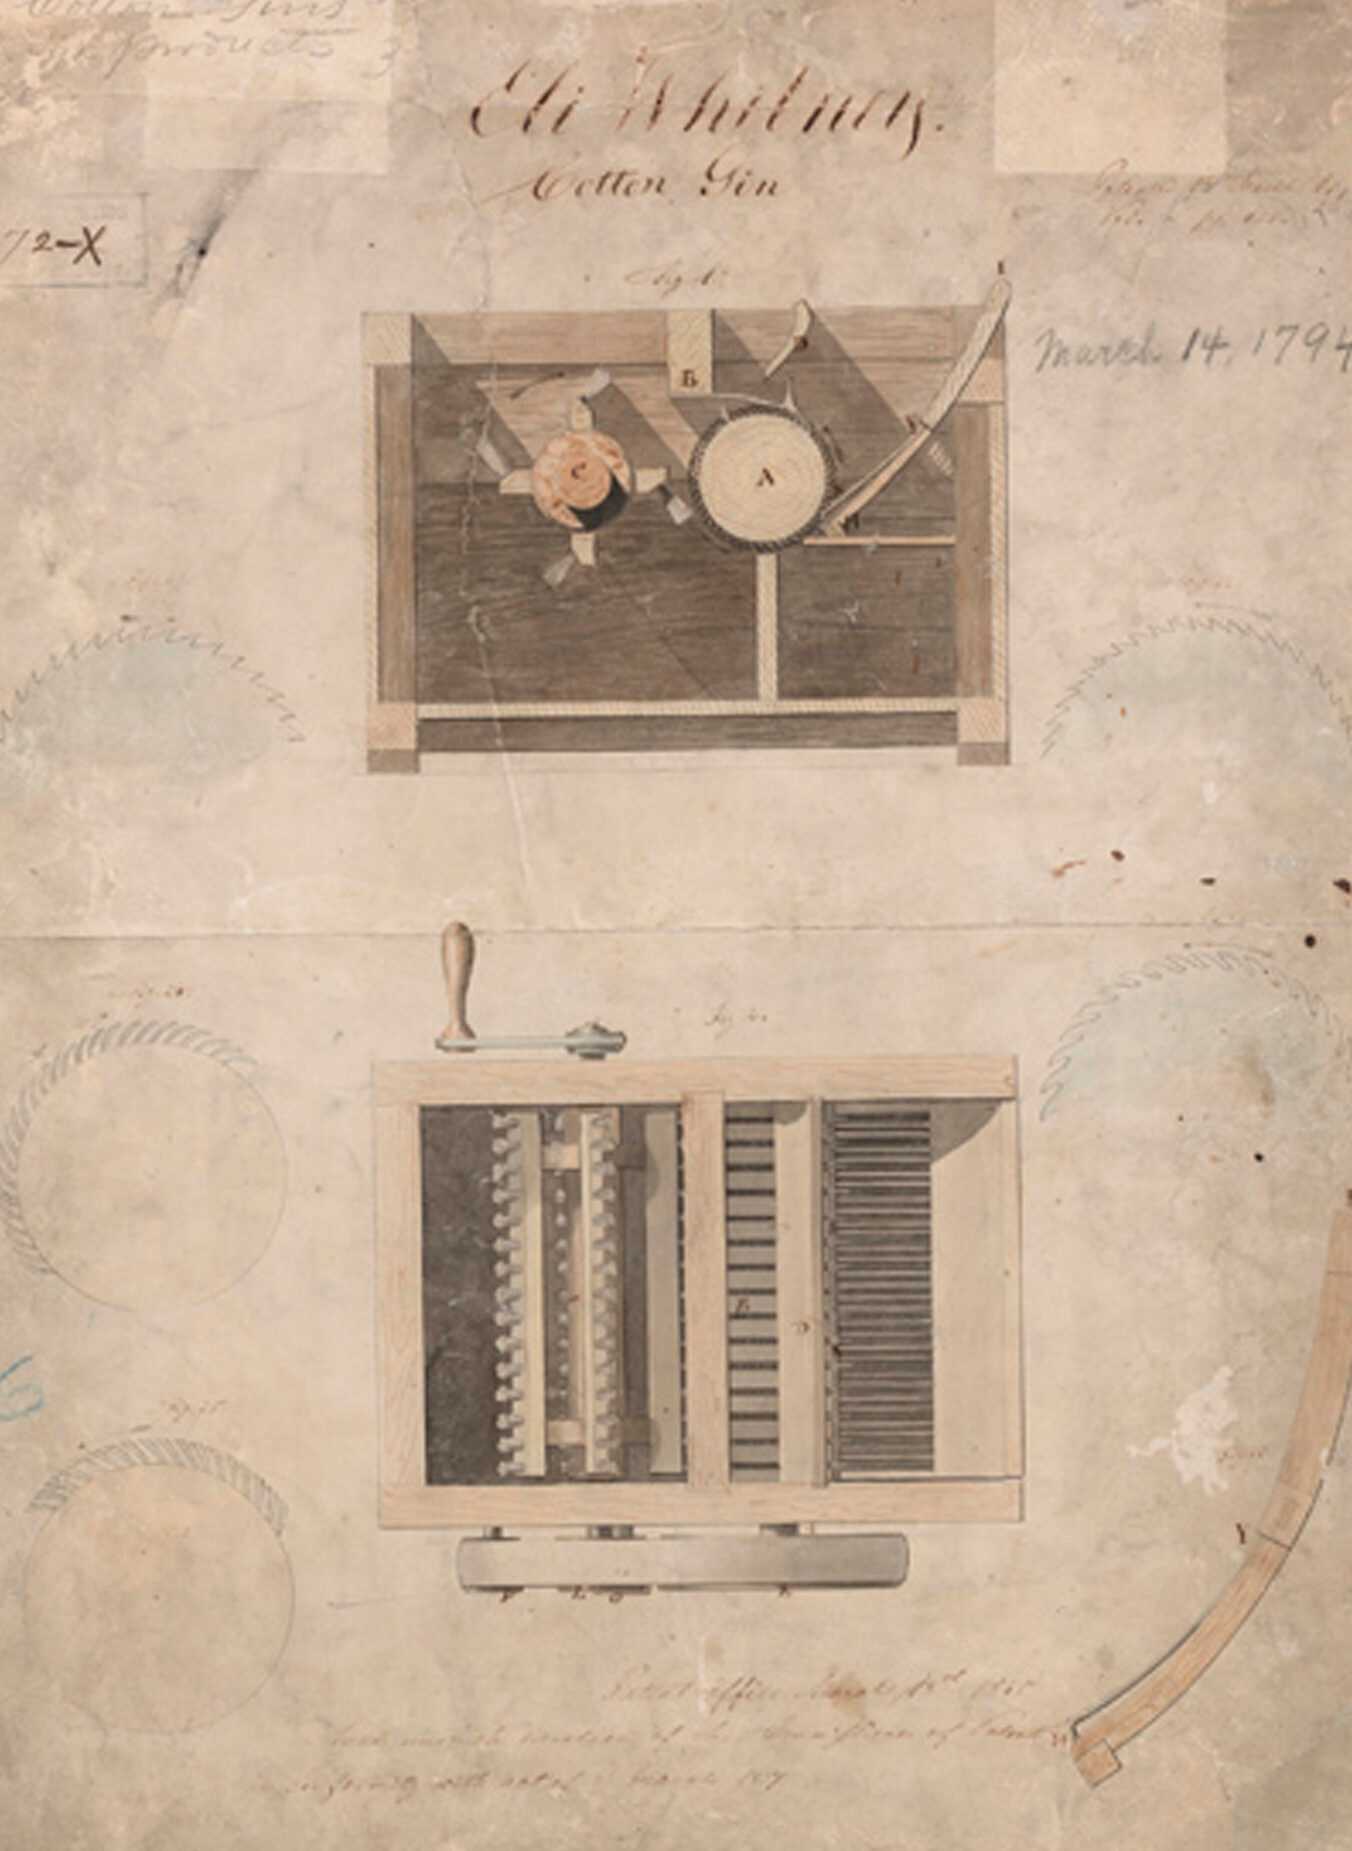 Document showing the patent for the cotton gin